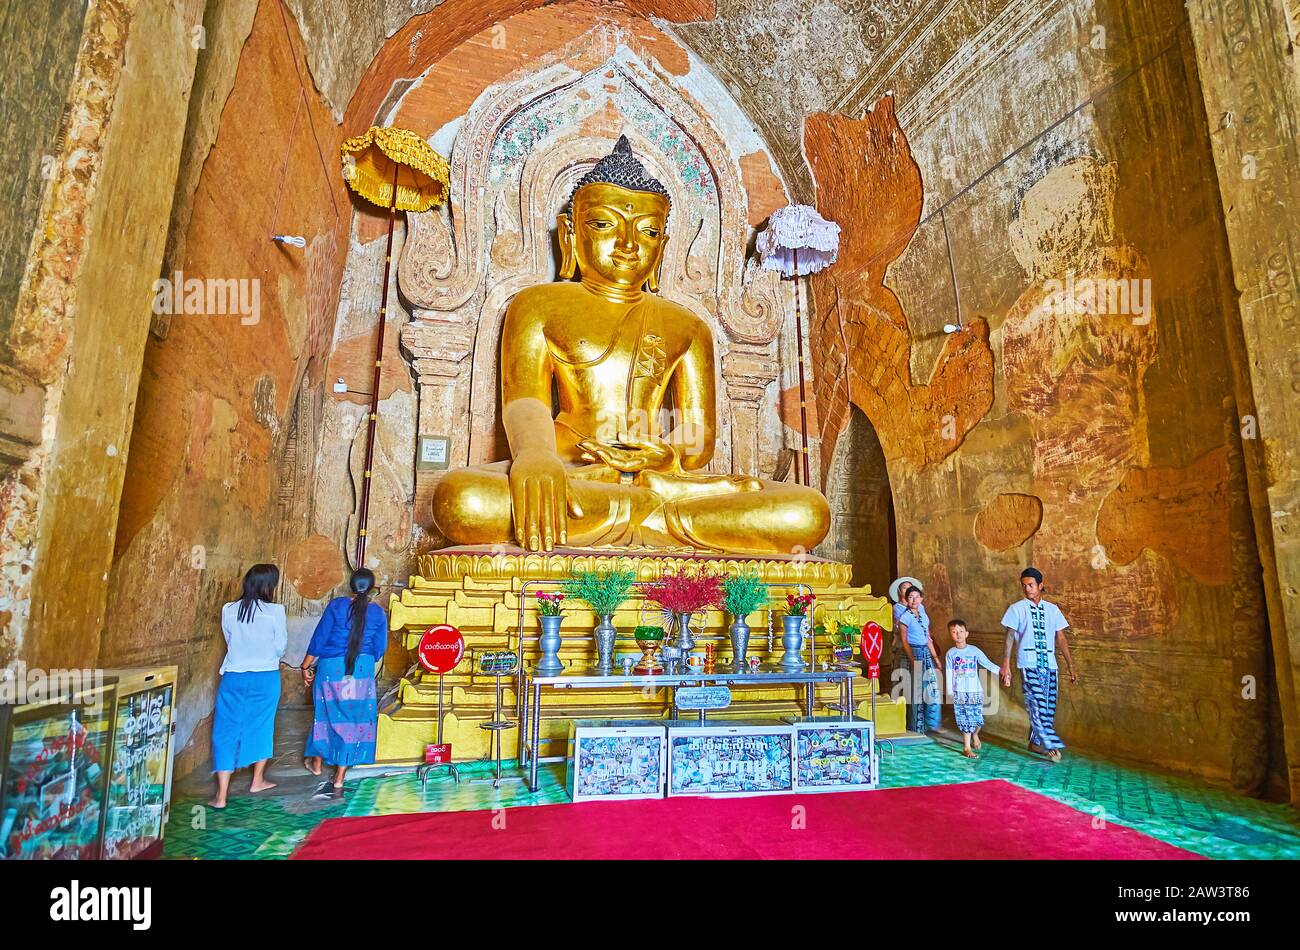 BAGAN, MYANMAR - FEBRUARY 25, 2018:  The Htilominlo Temple prayer hall with amazing golden image of Buddha, surrounded by ancient frescoes and molding Stock Photo